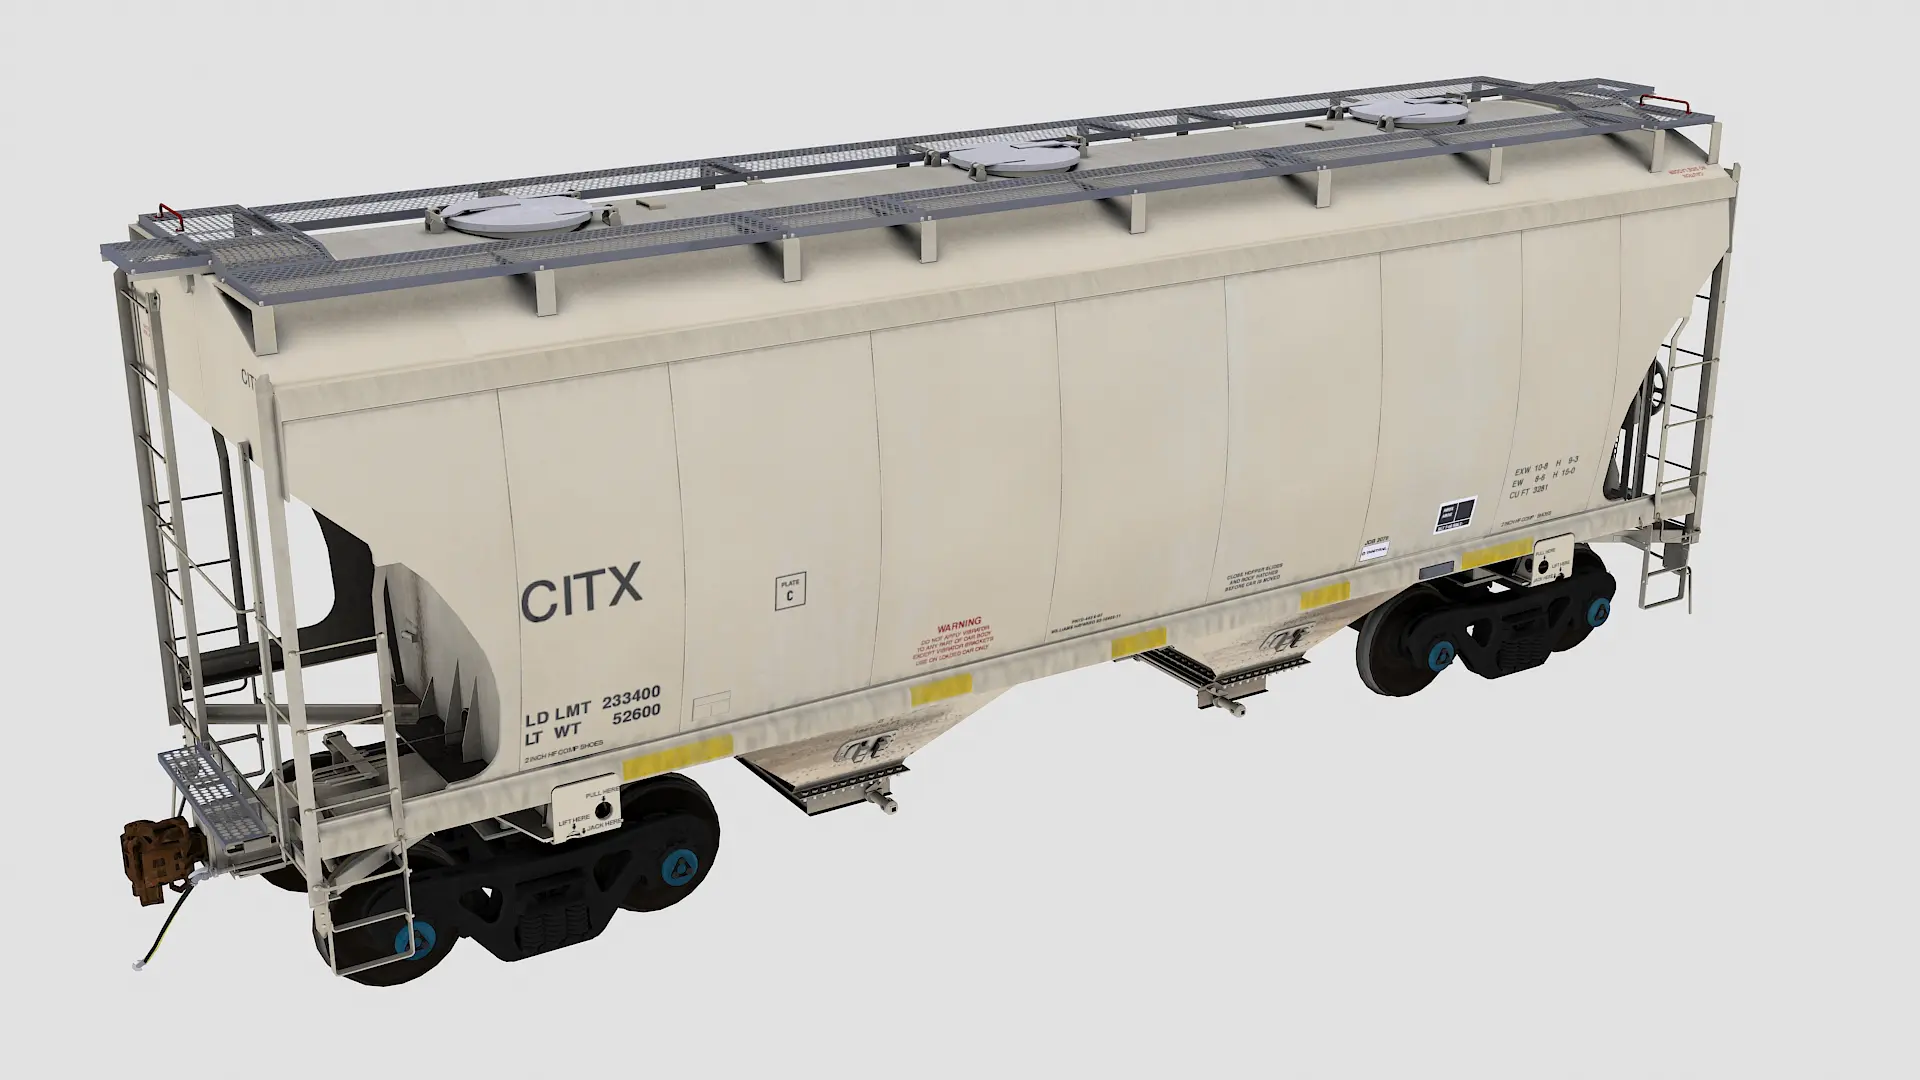 Citx is a two bay covered hopper